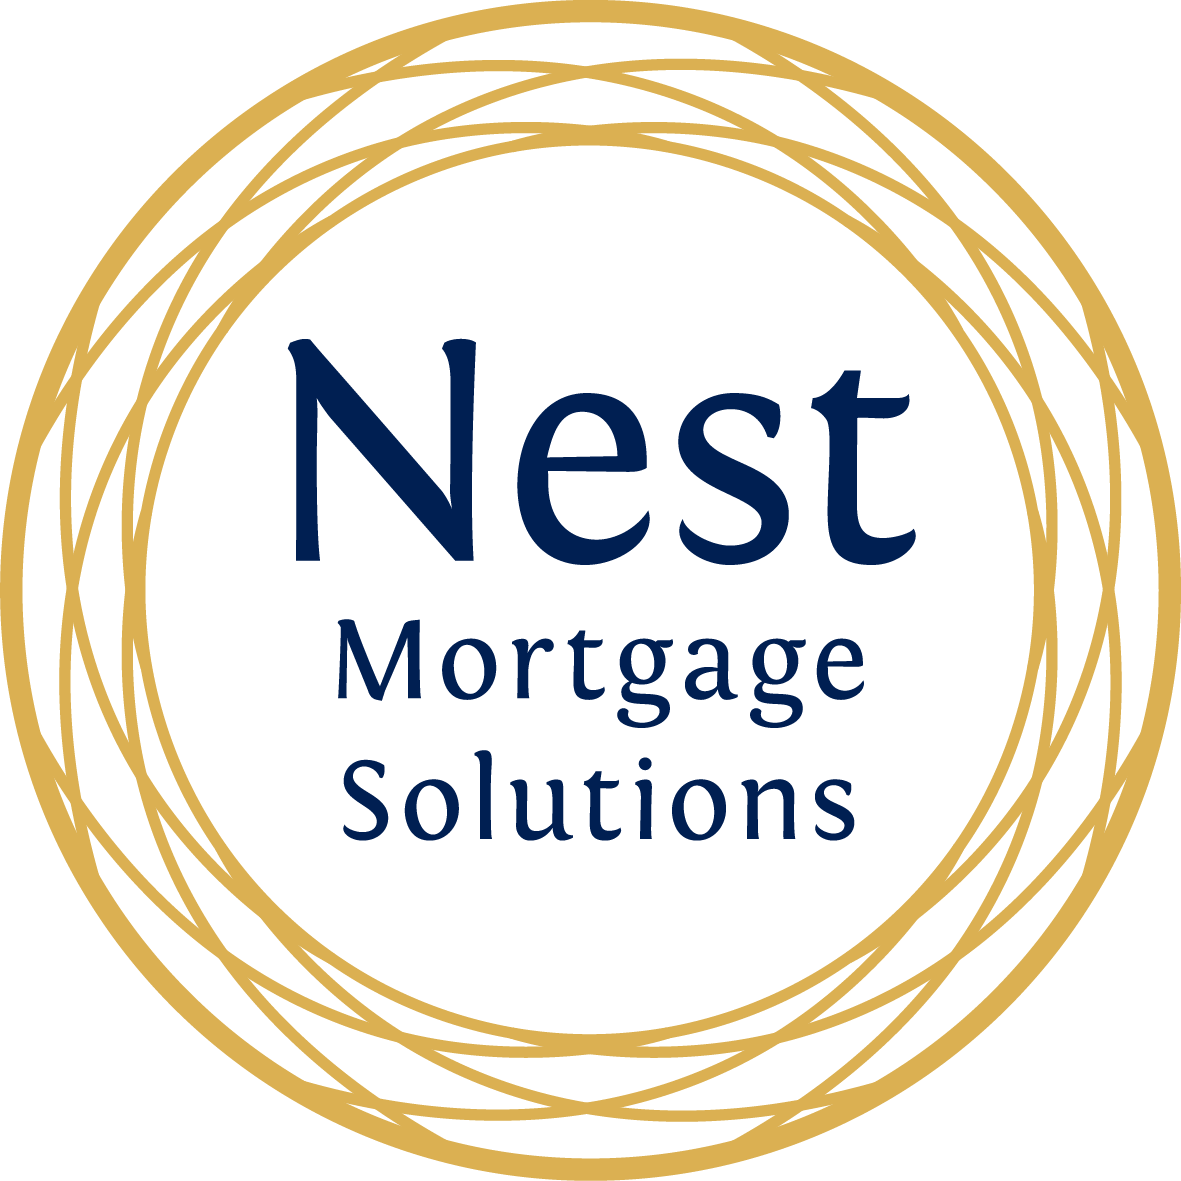 Nest Mortgage Solutions